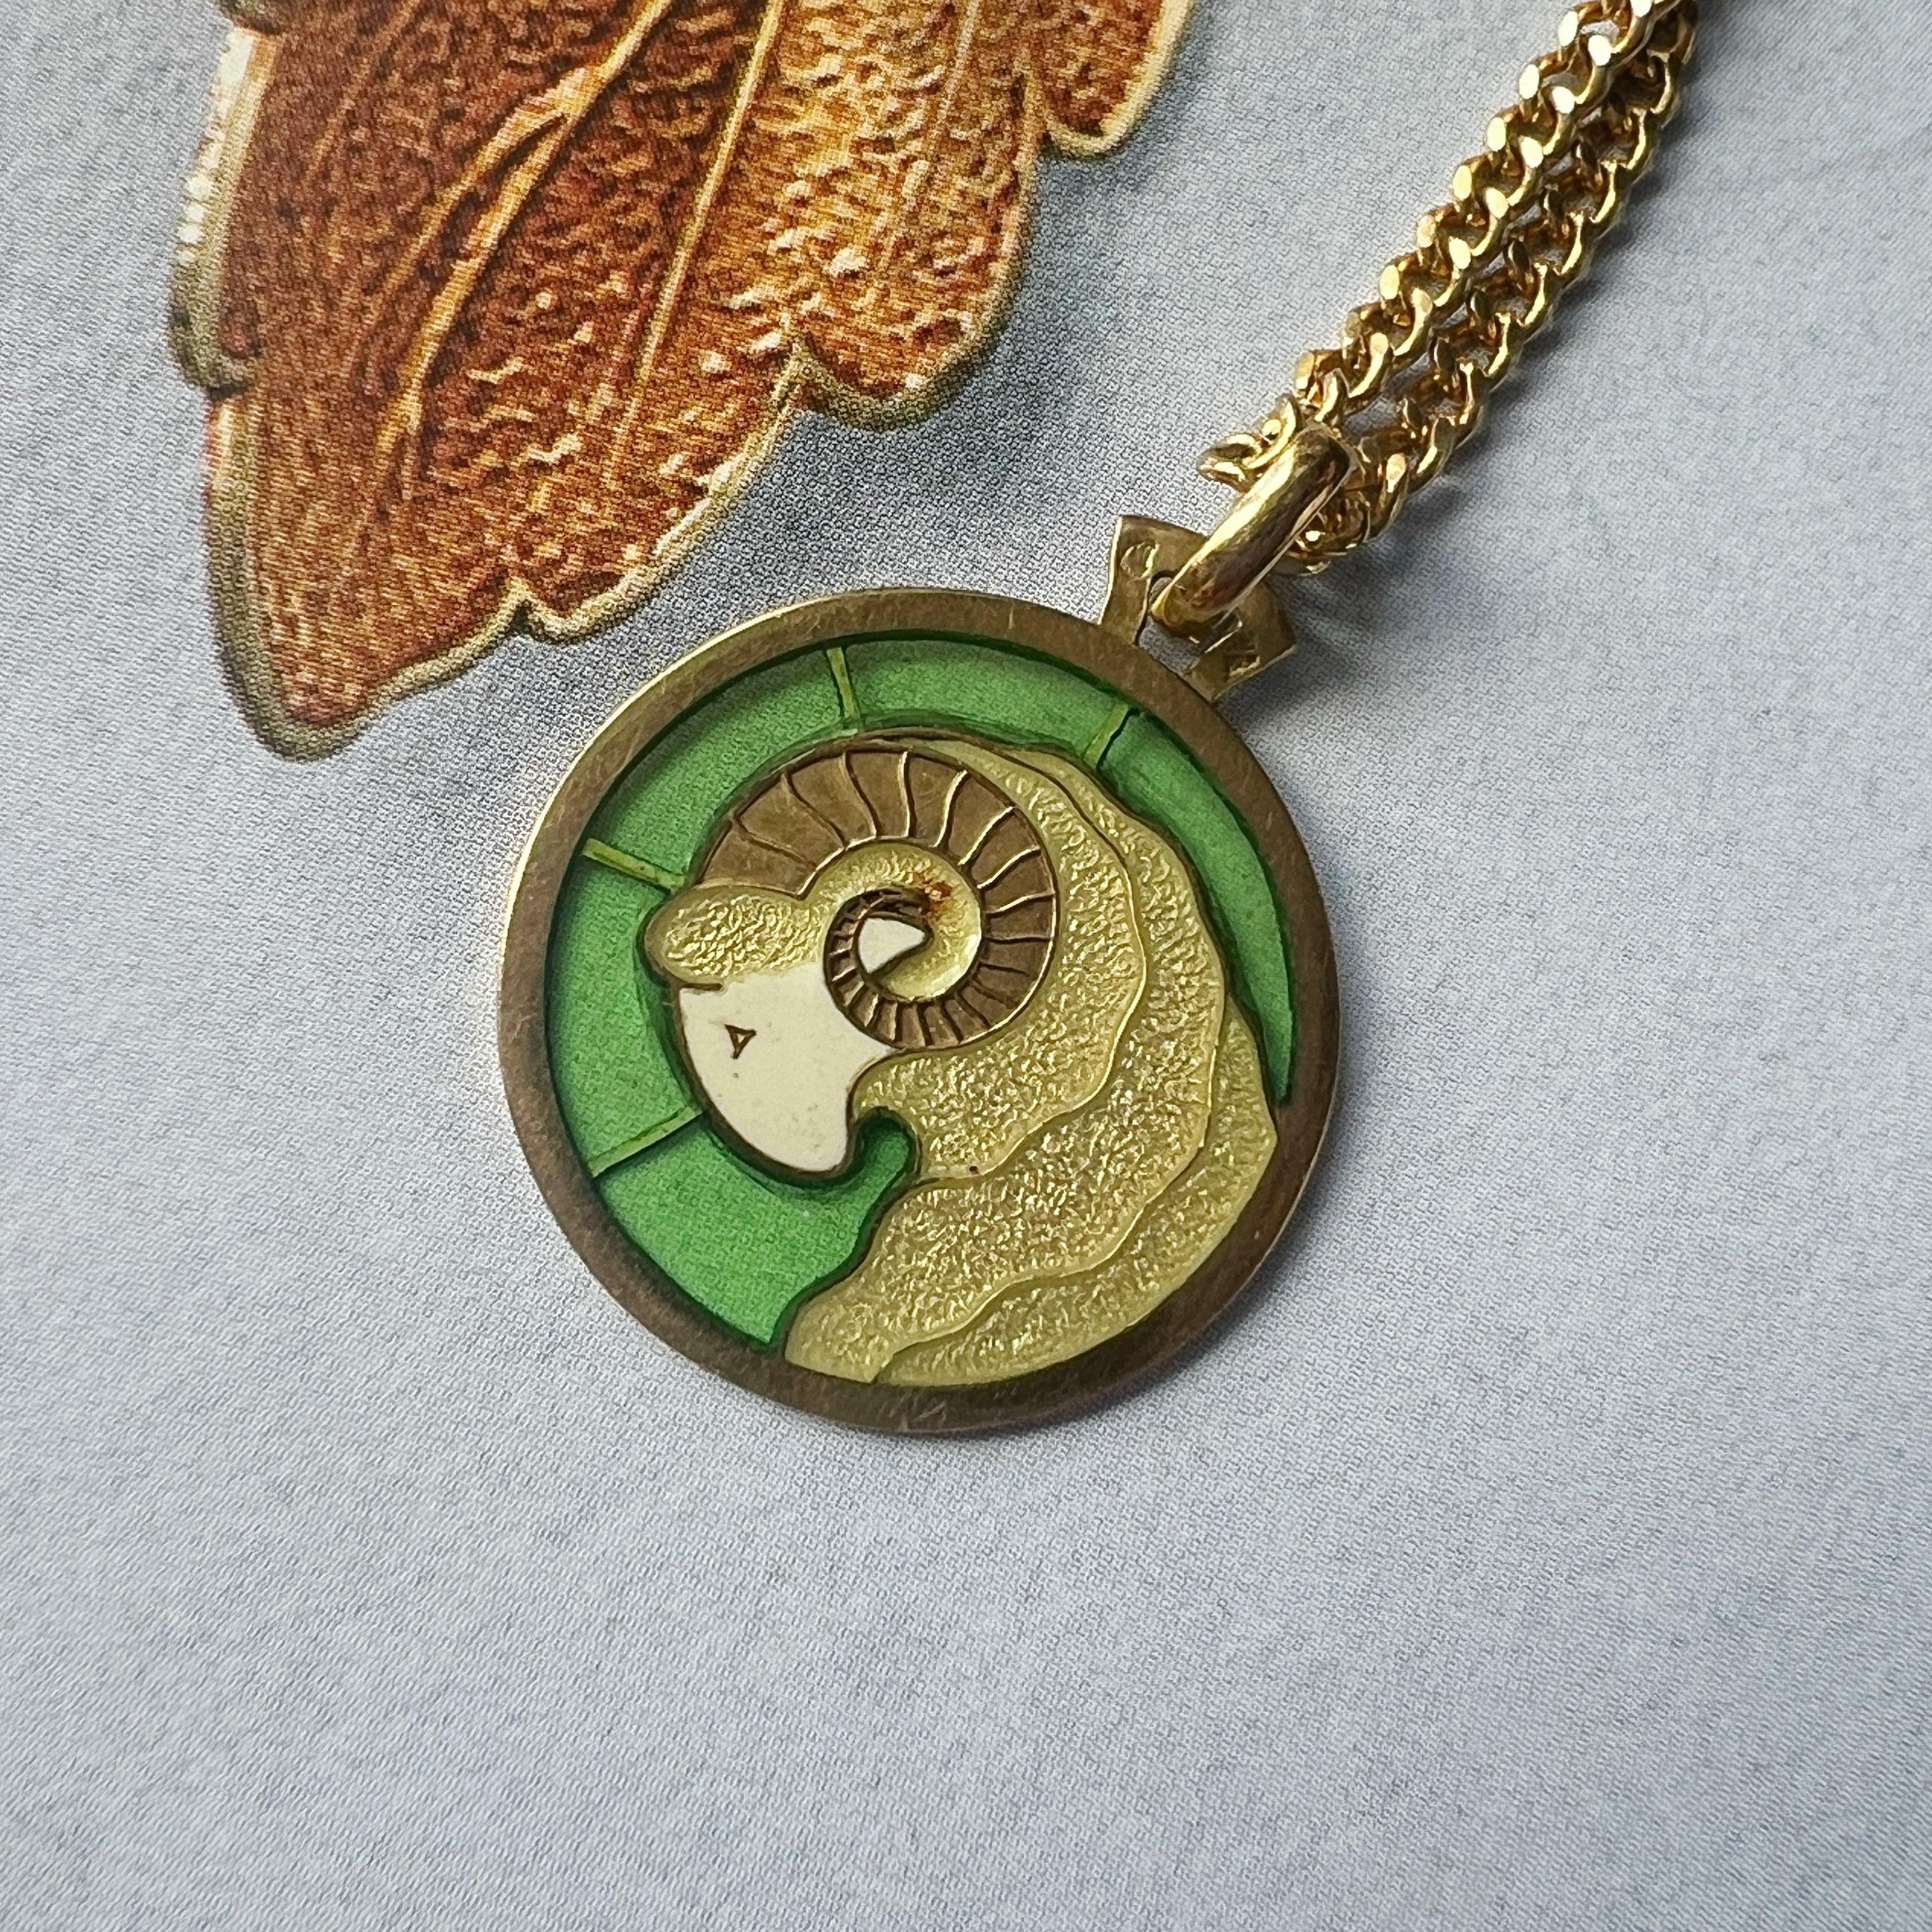 For sale a rare French Vintage 18K gold Aries Zodiac Medal by Maison Arthus Bertrand.

The medal features a beautiful green plique a jour enamel on which a ram head is shown, symbolising the Zodiac symbol of Aries. The lighter yellowish green color